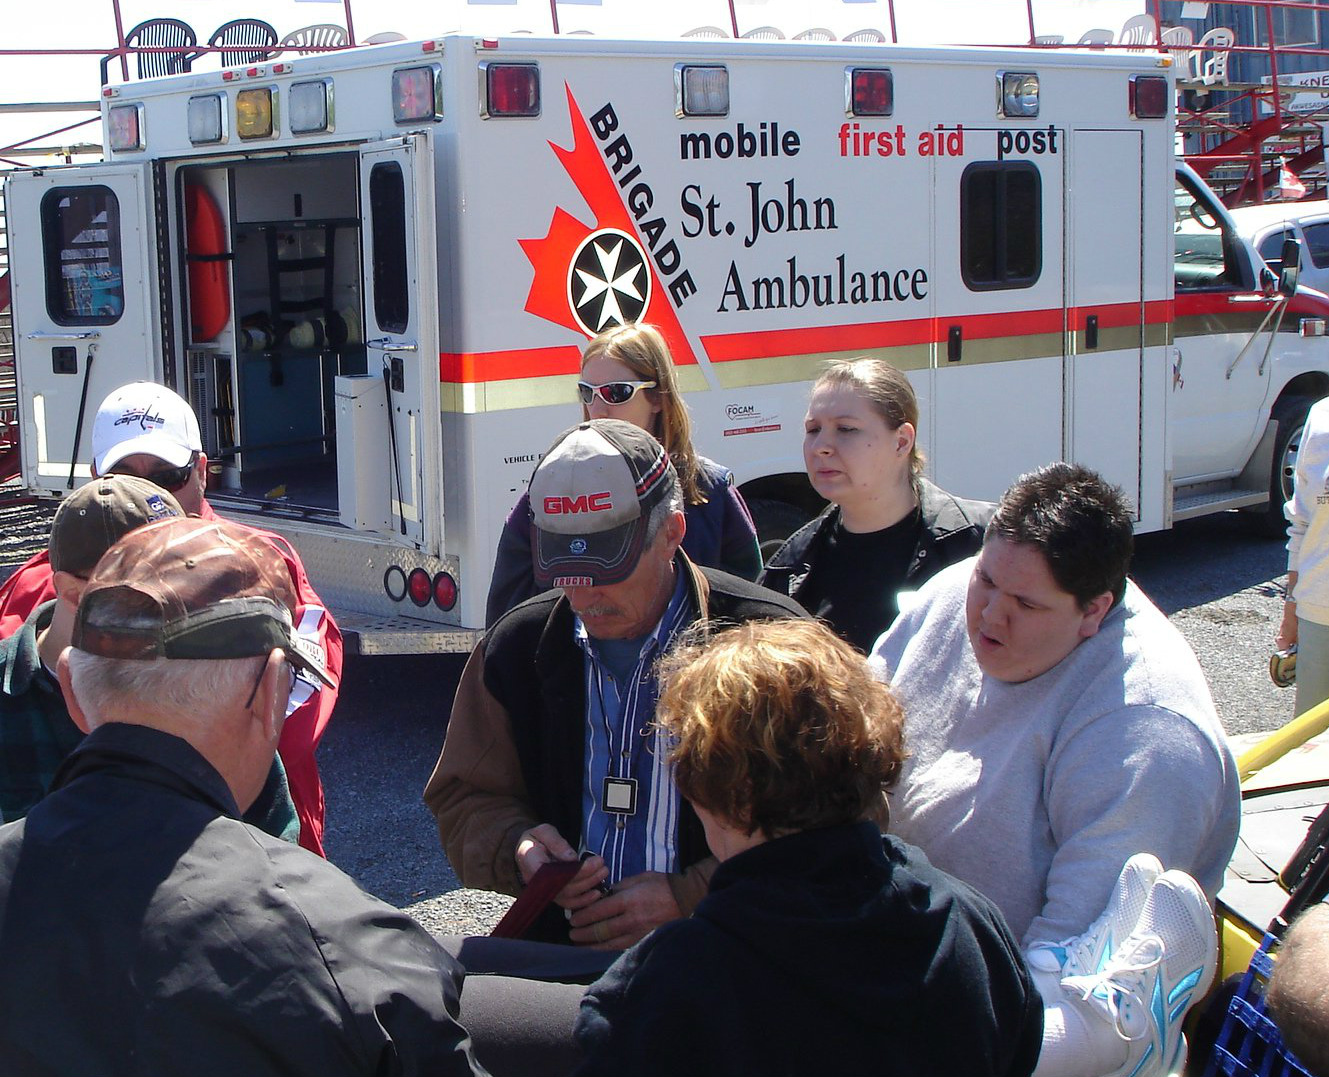 MORE REVENUE NEEDED: St. John Ambulance could close in Cornwall